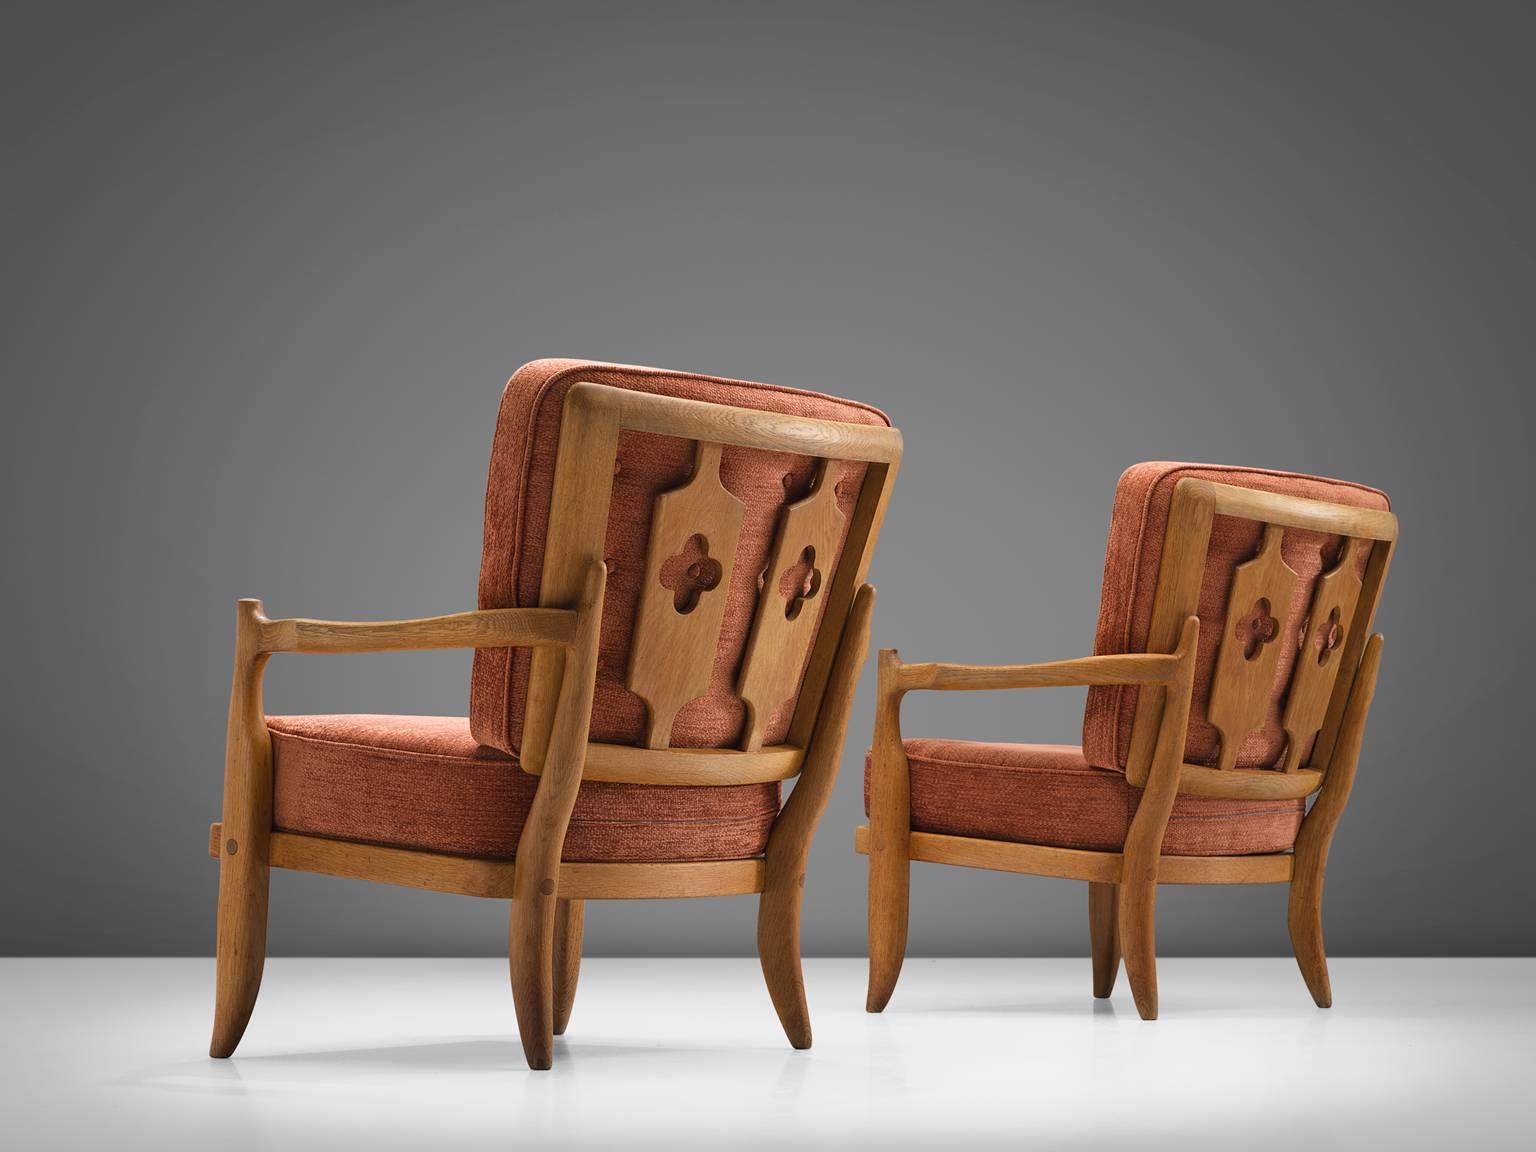 Guillerme and Chambron, red orange fabric, oak, rope, France, 1950s

These sculptural easy chairs are designed by Guillerme and Chambron. The design duo is known for their sculptural, crafted solid oak furniture. These comfortable armchairs have